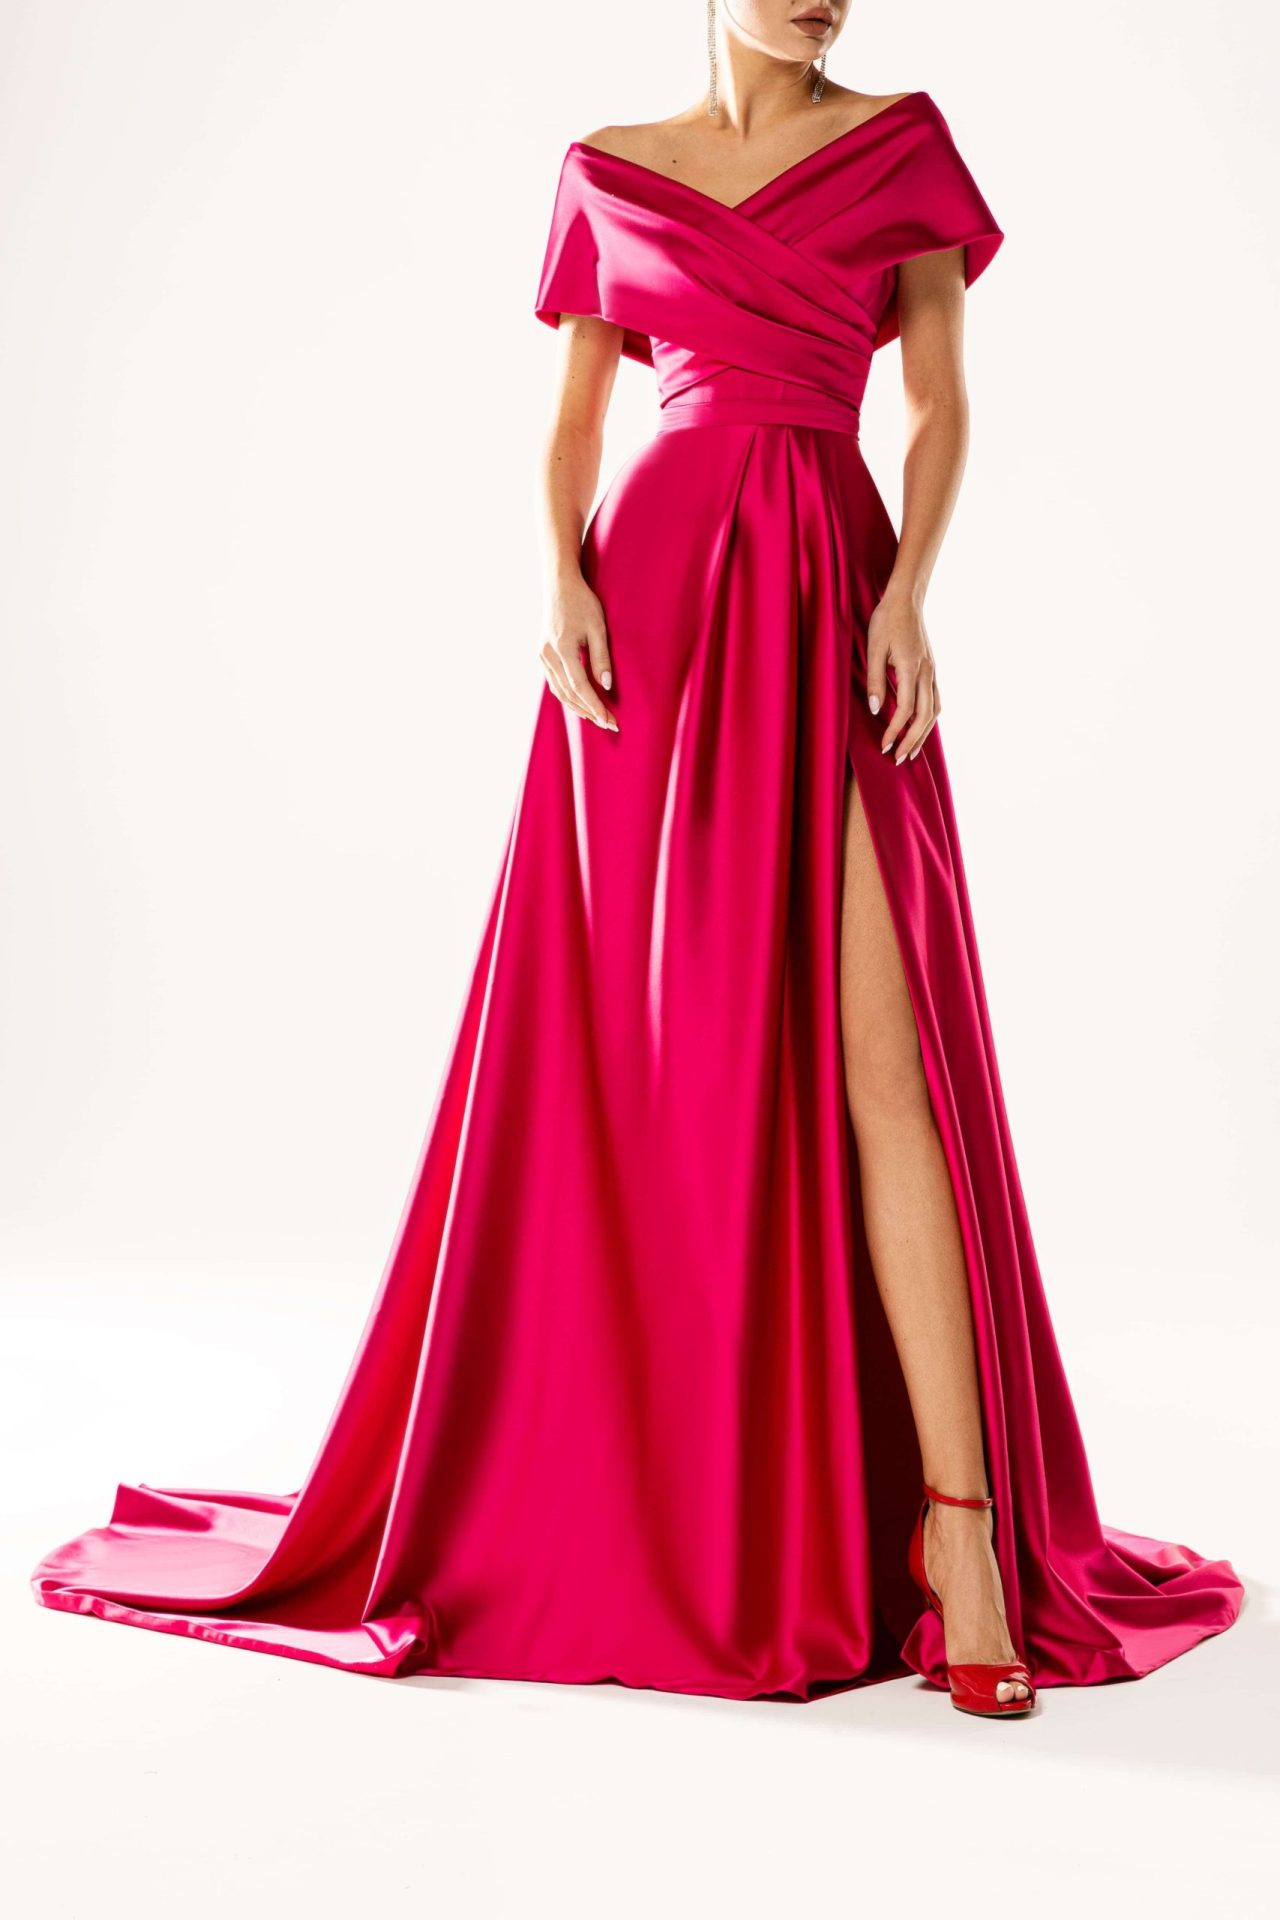 Maid of honor pink dress